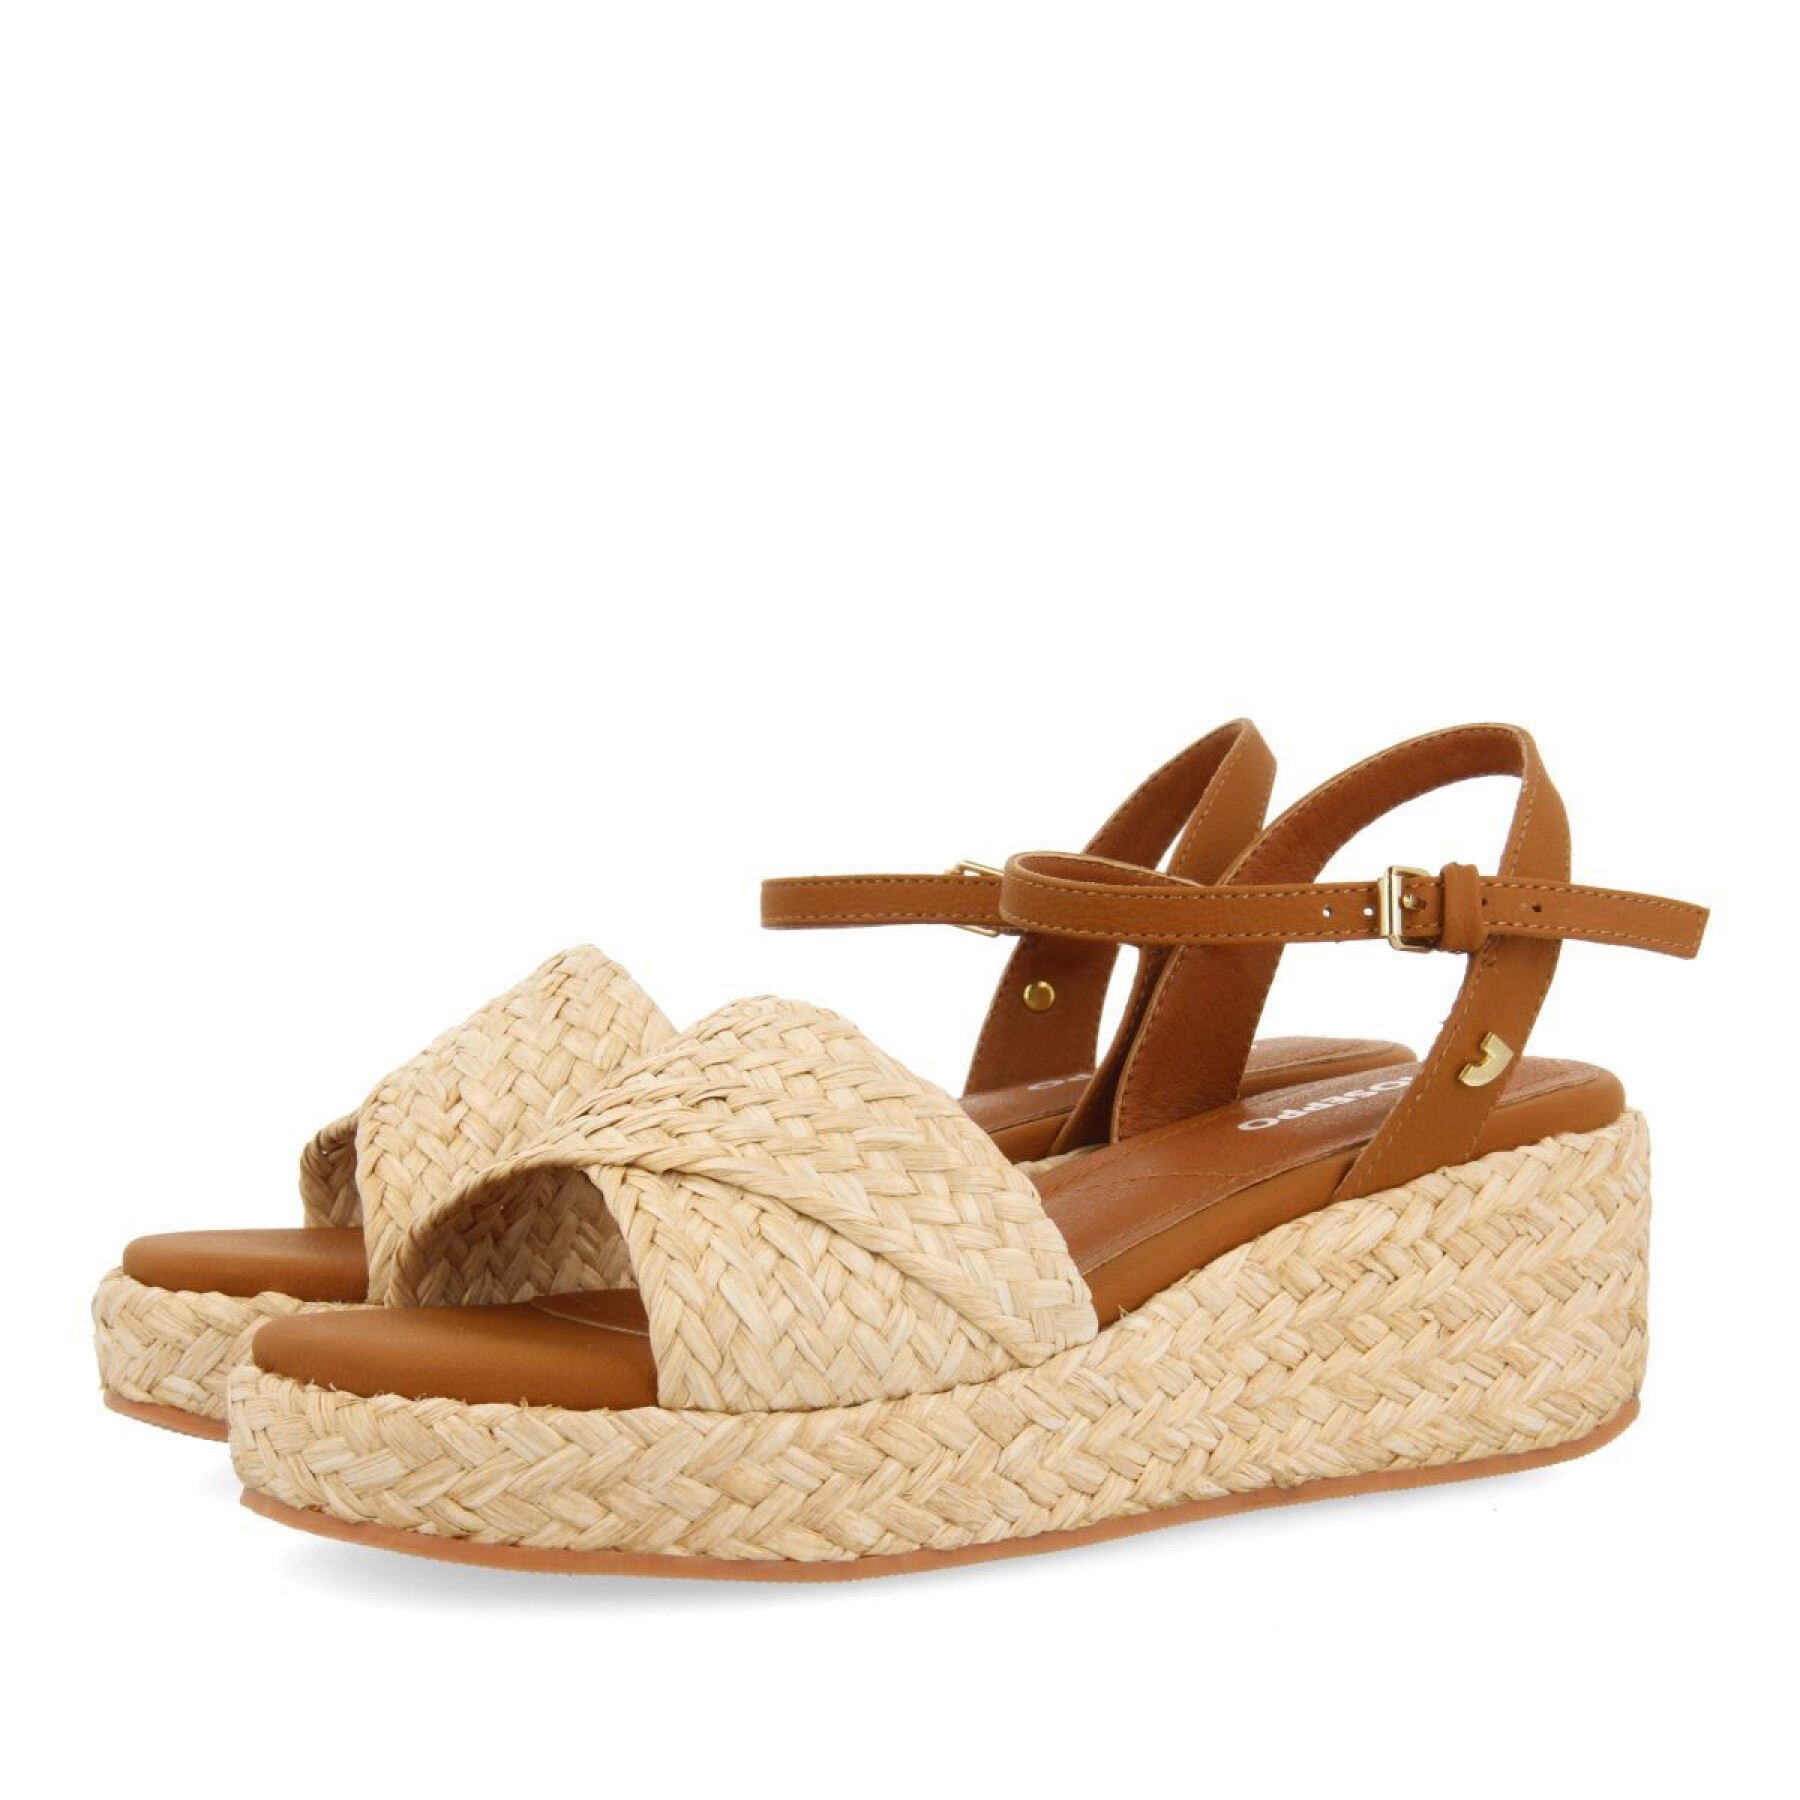 Women's sandals Gioseppo Coos